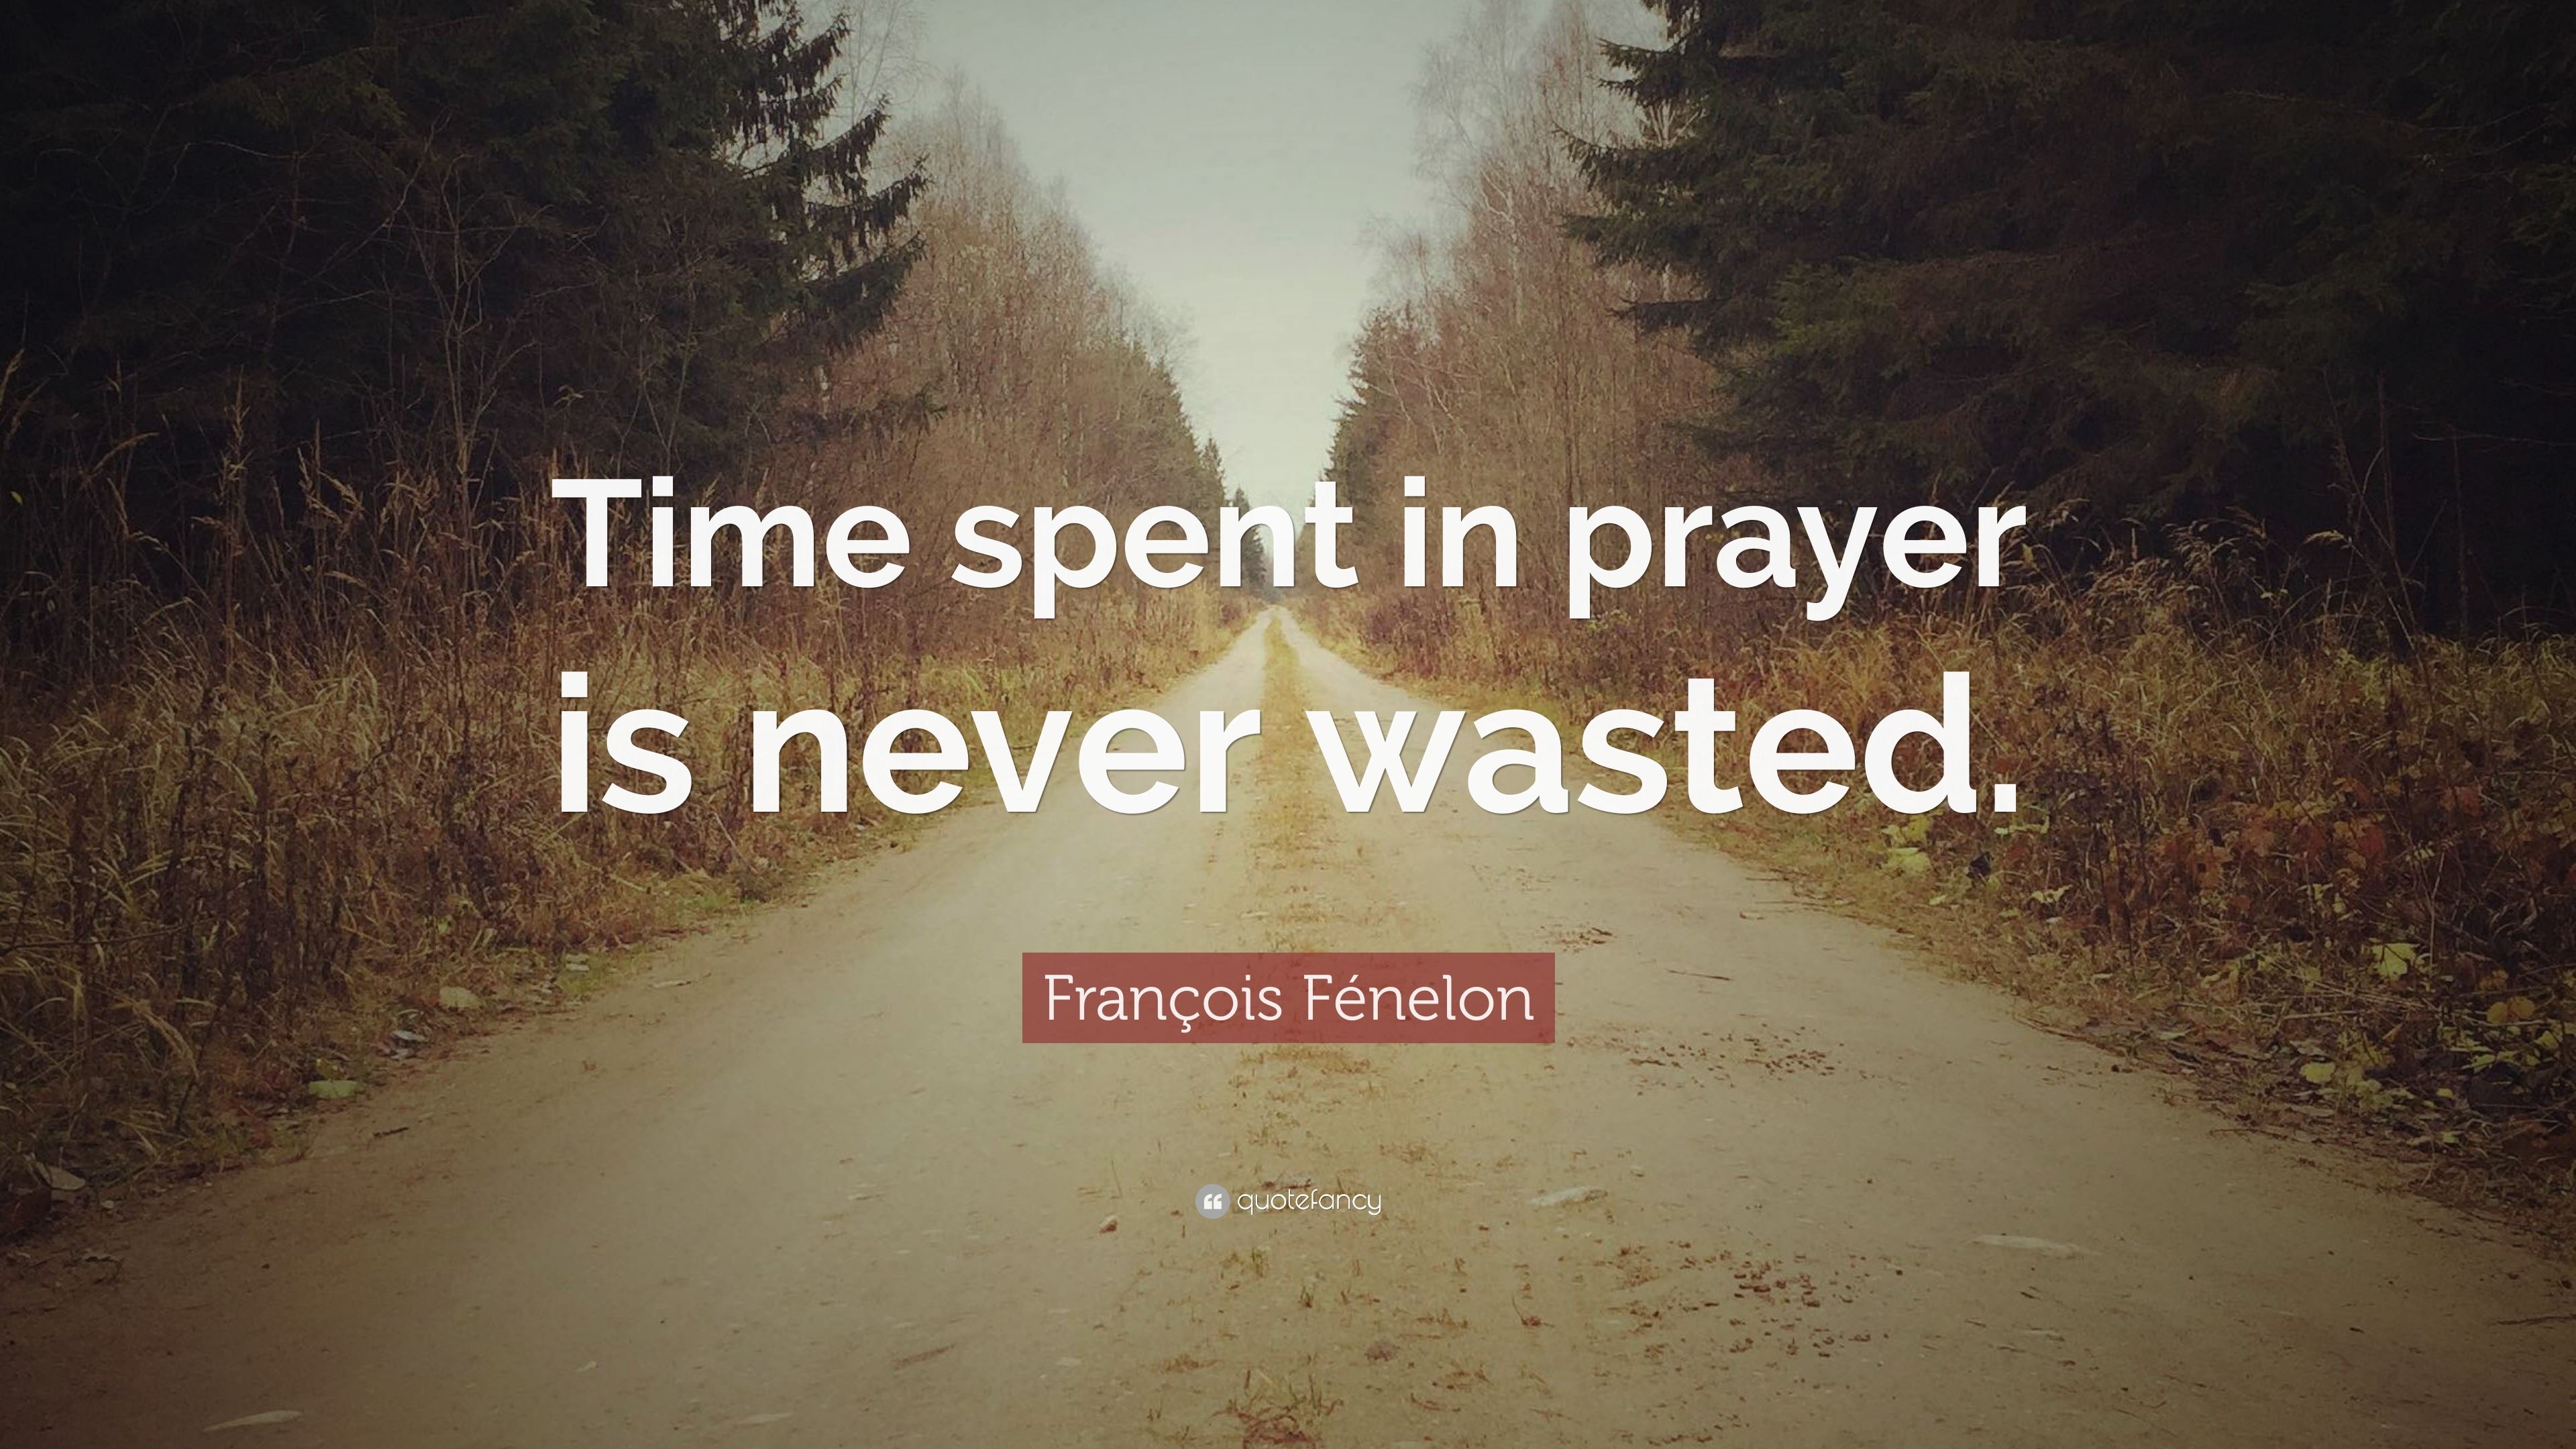 François Fénelon Quote: “Time spent in prayer is never wasted.” (12